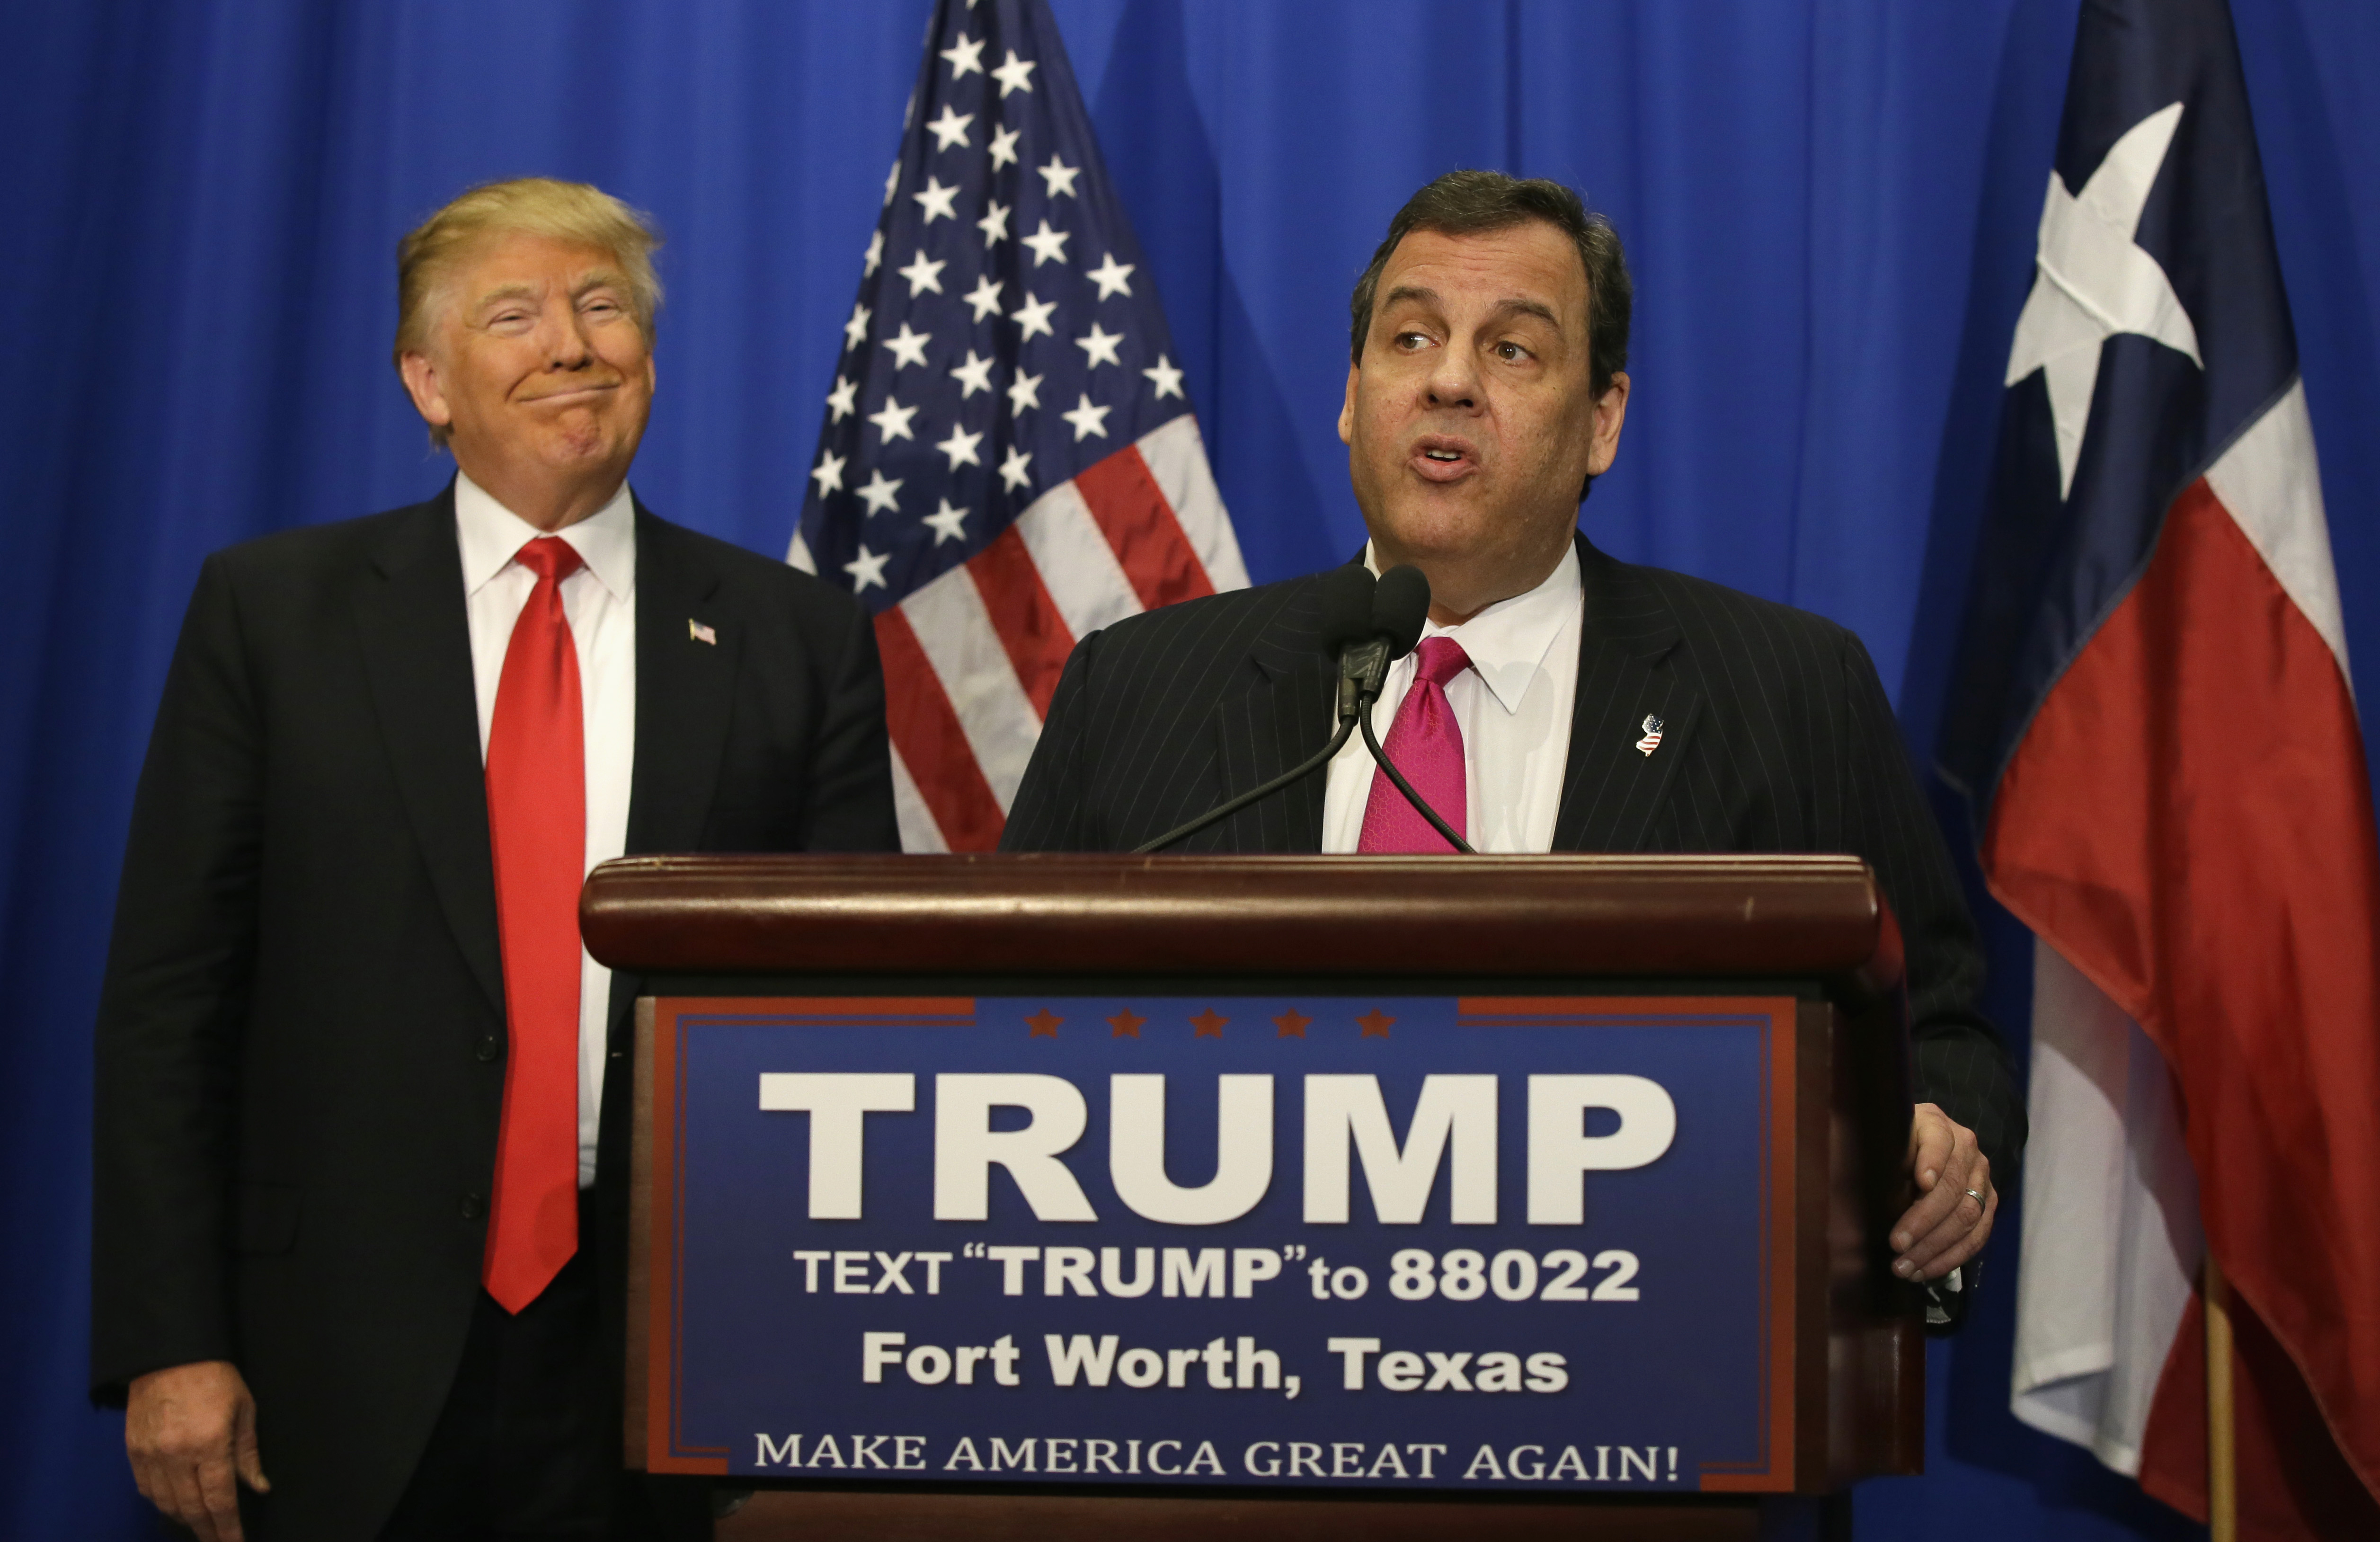 Christie chooses sides